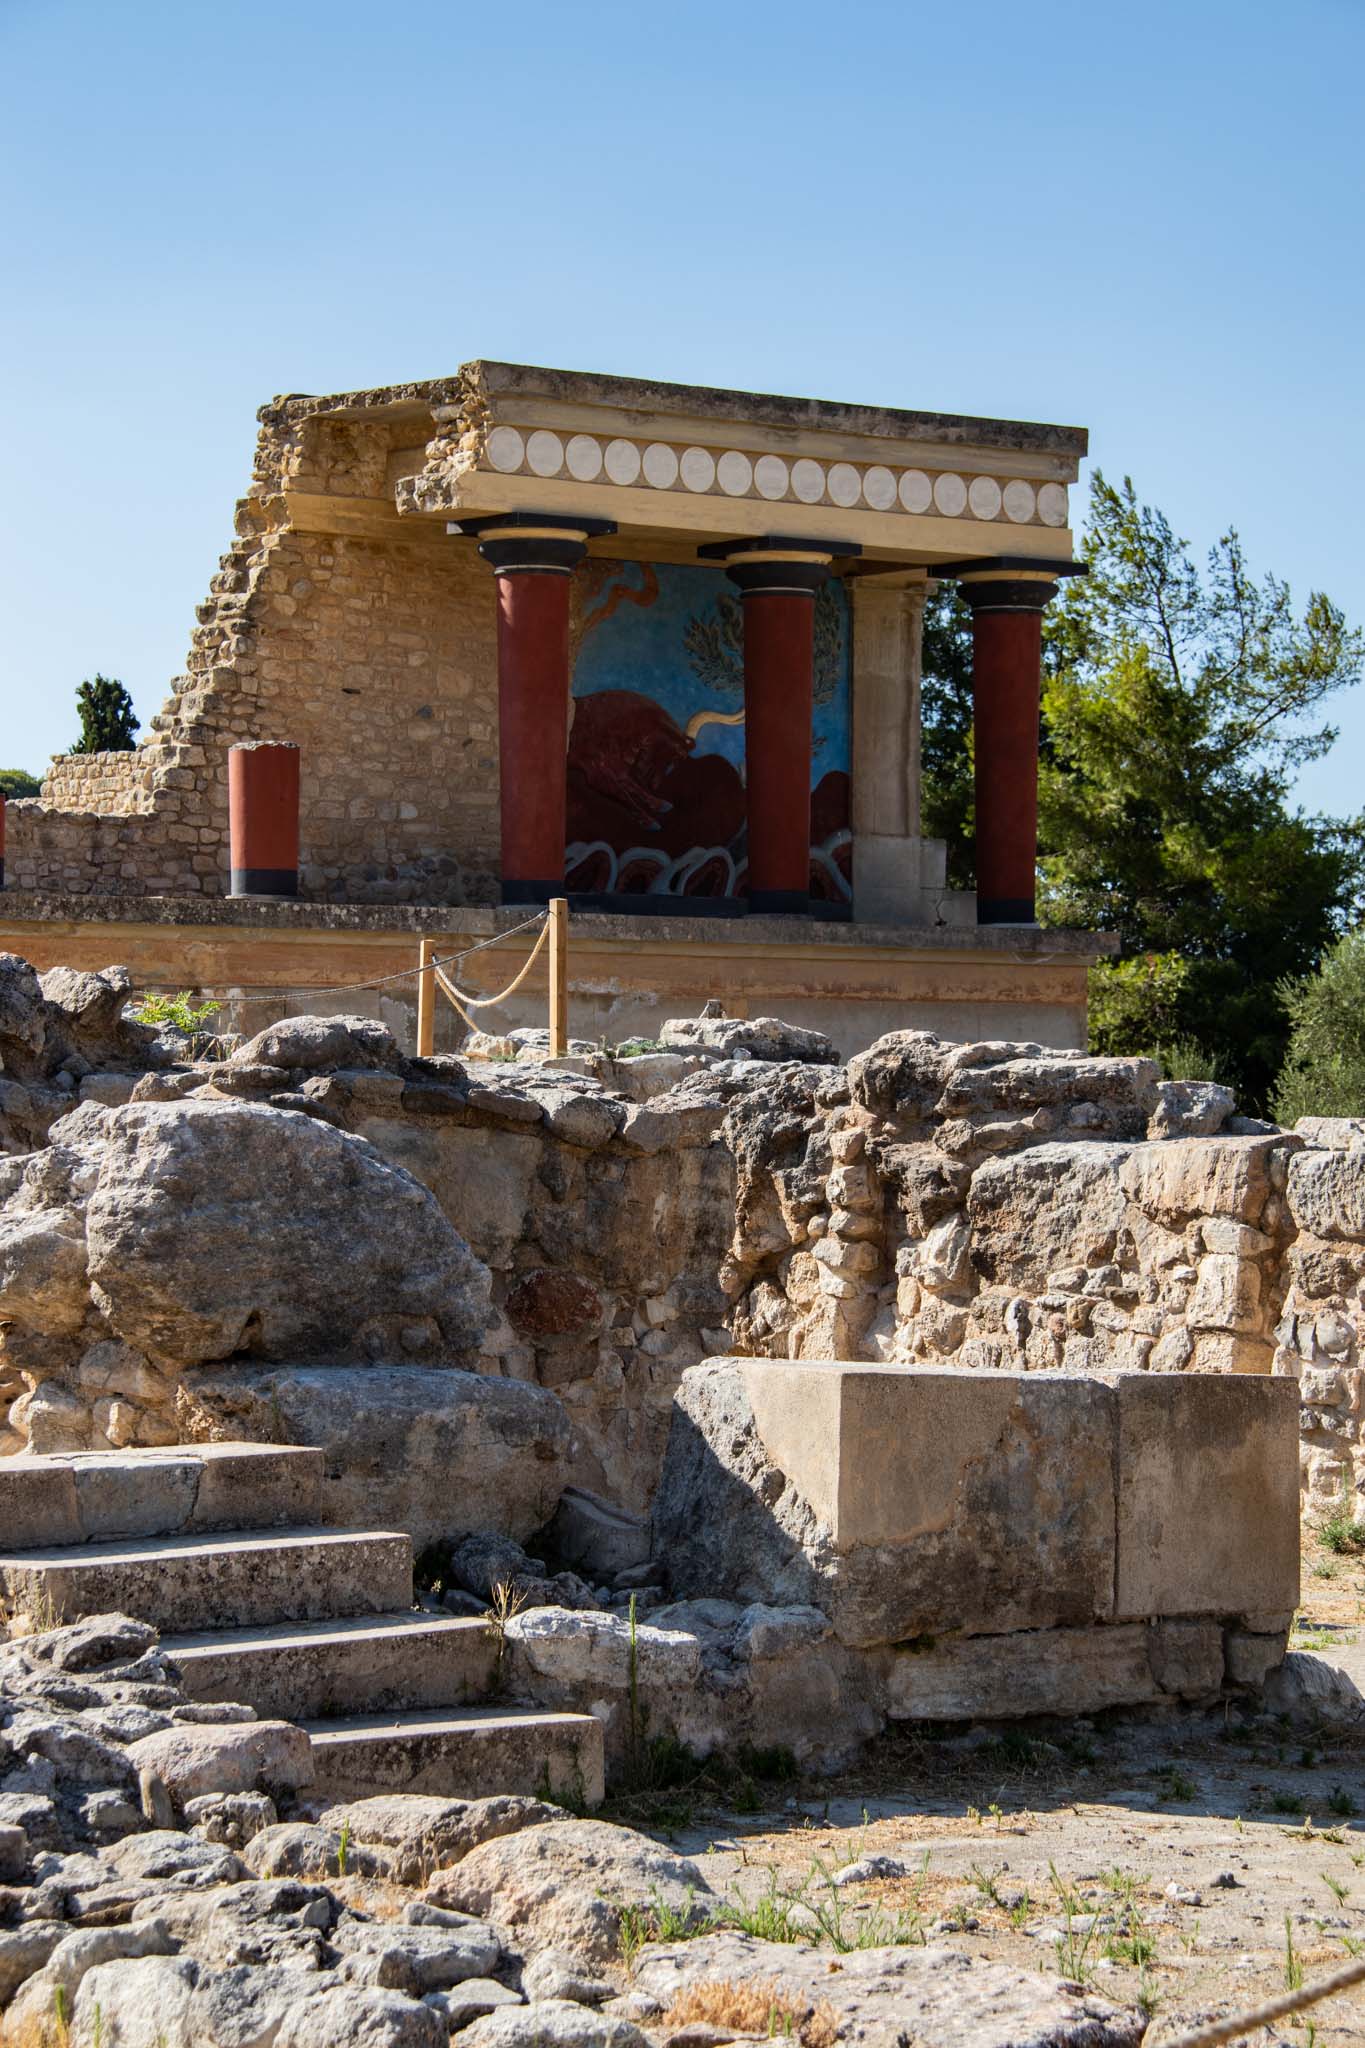 A view over the Palace of Knossos,  in Greece.